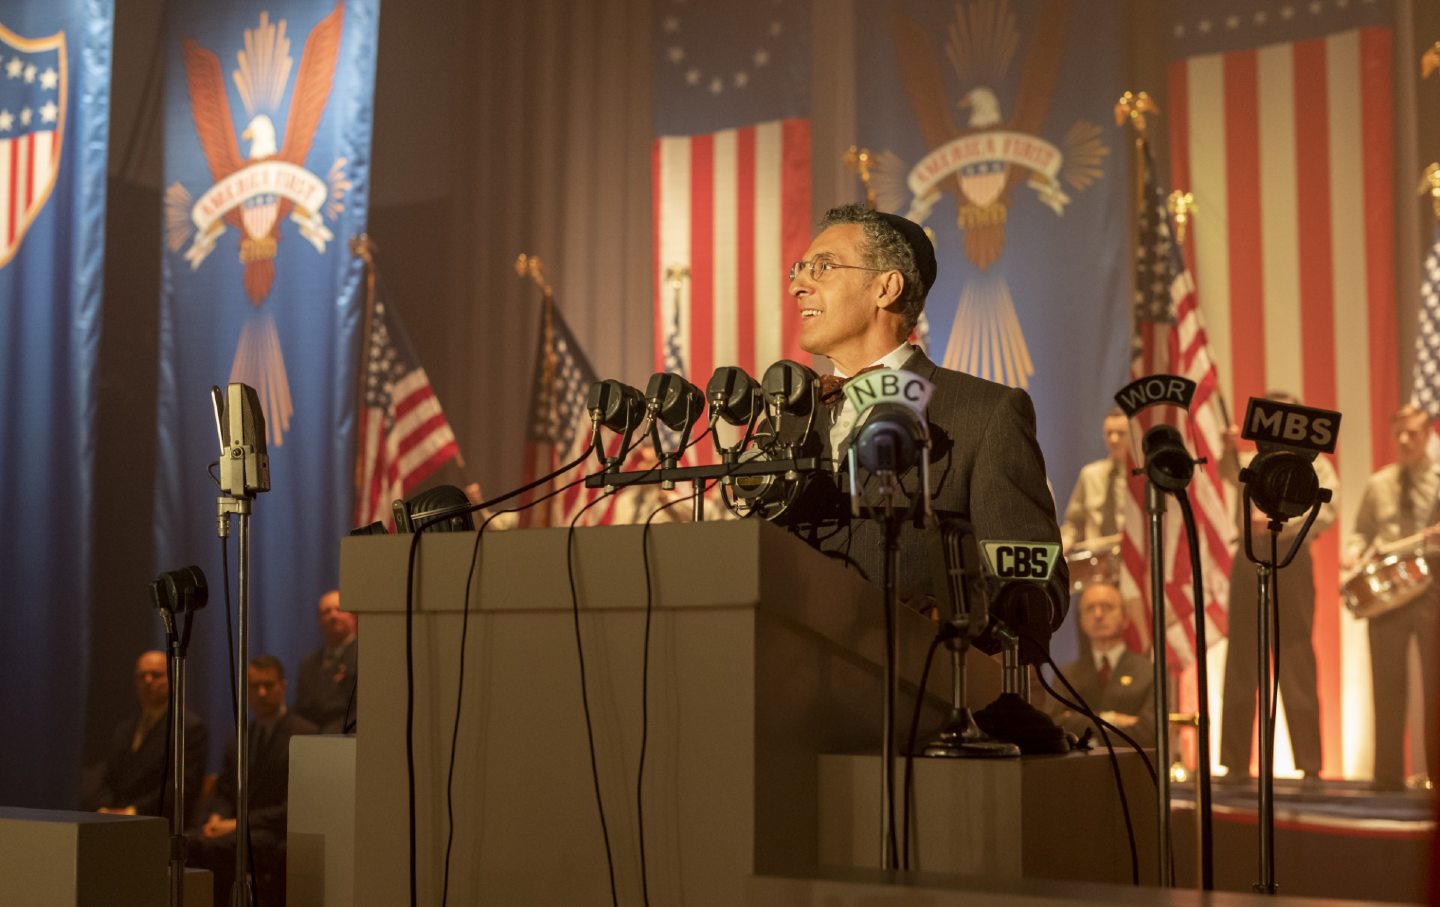 John Turturro stands at a podium with microphones, playing a rabbi in The Plot Against America